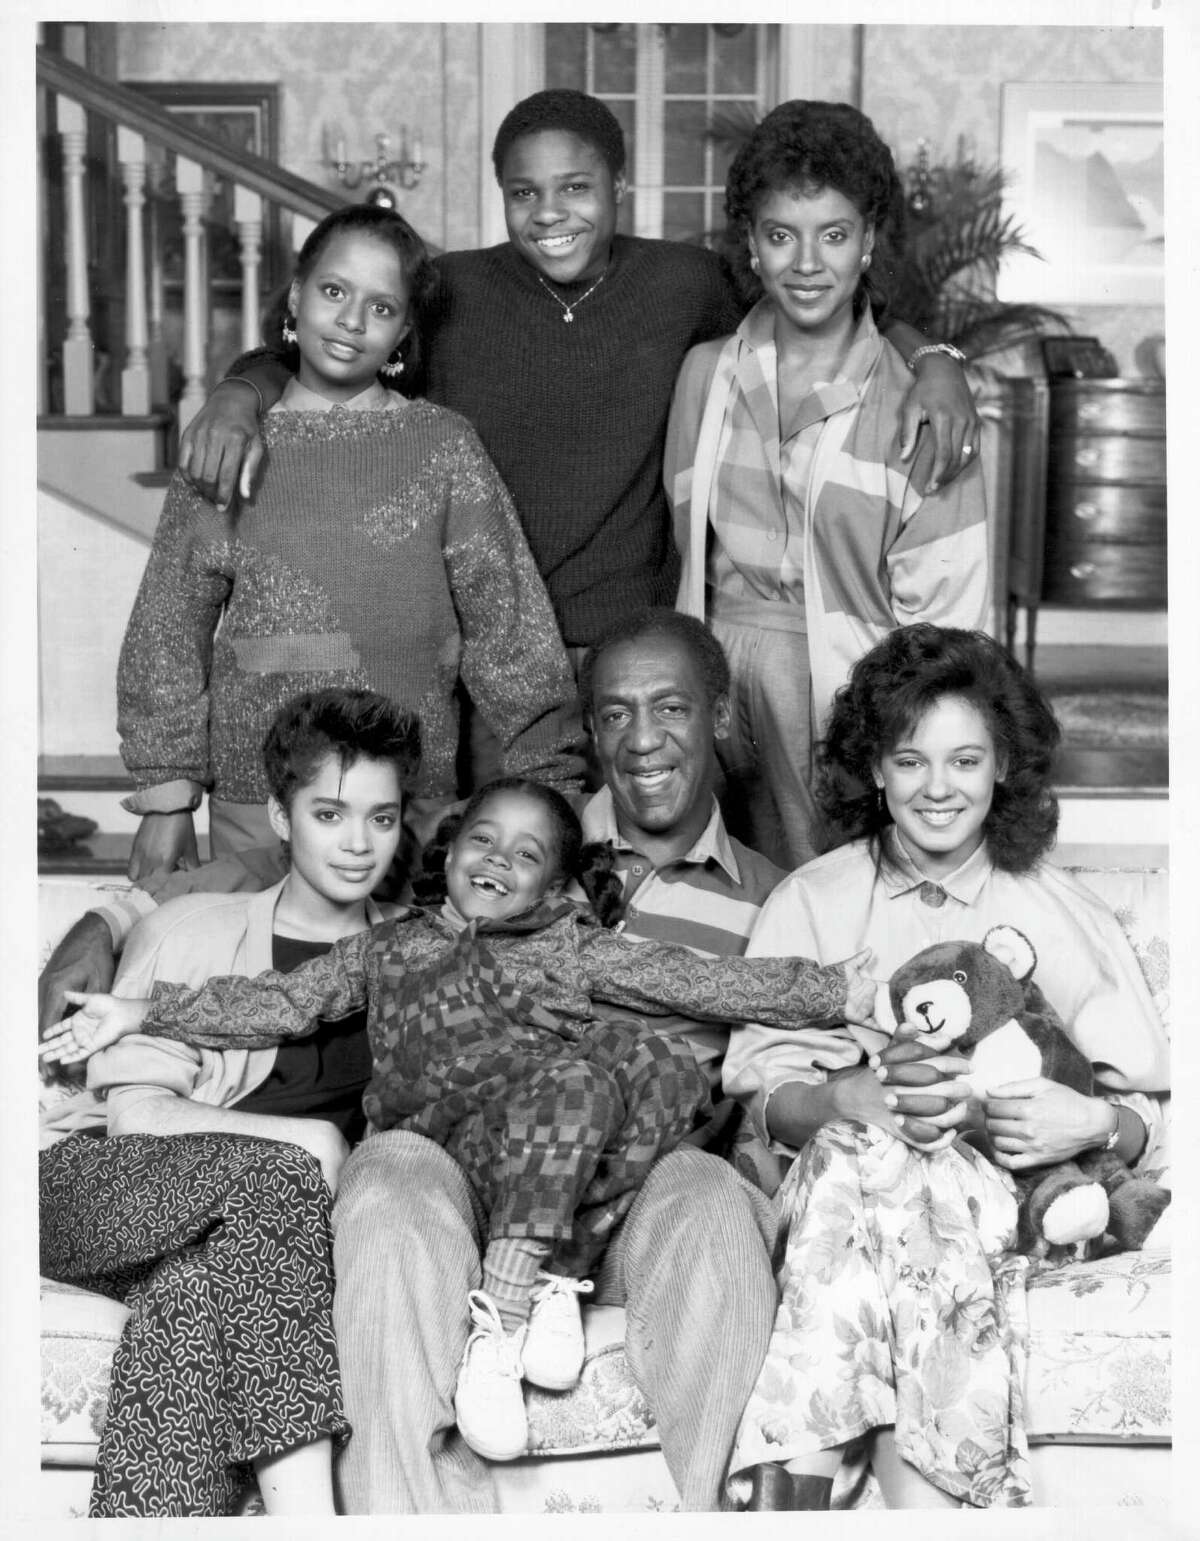 The cast of "The Cosby Show" is seen in this photo from Sept. 13, 1985. Front row, left to right: Lisa Bonet, Bill Cosby, Keshia Knight Pulliam and Phylicia Ayers-Allen; Back row, left to right: Sabrina Le Beauf, Tempestt Bledsoe and Malcolm-Jamal Warner.